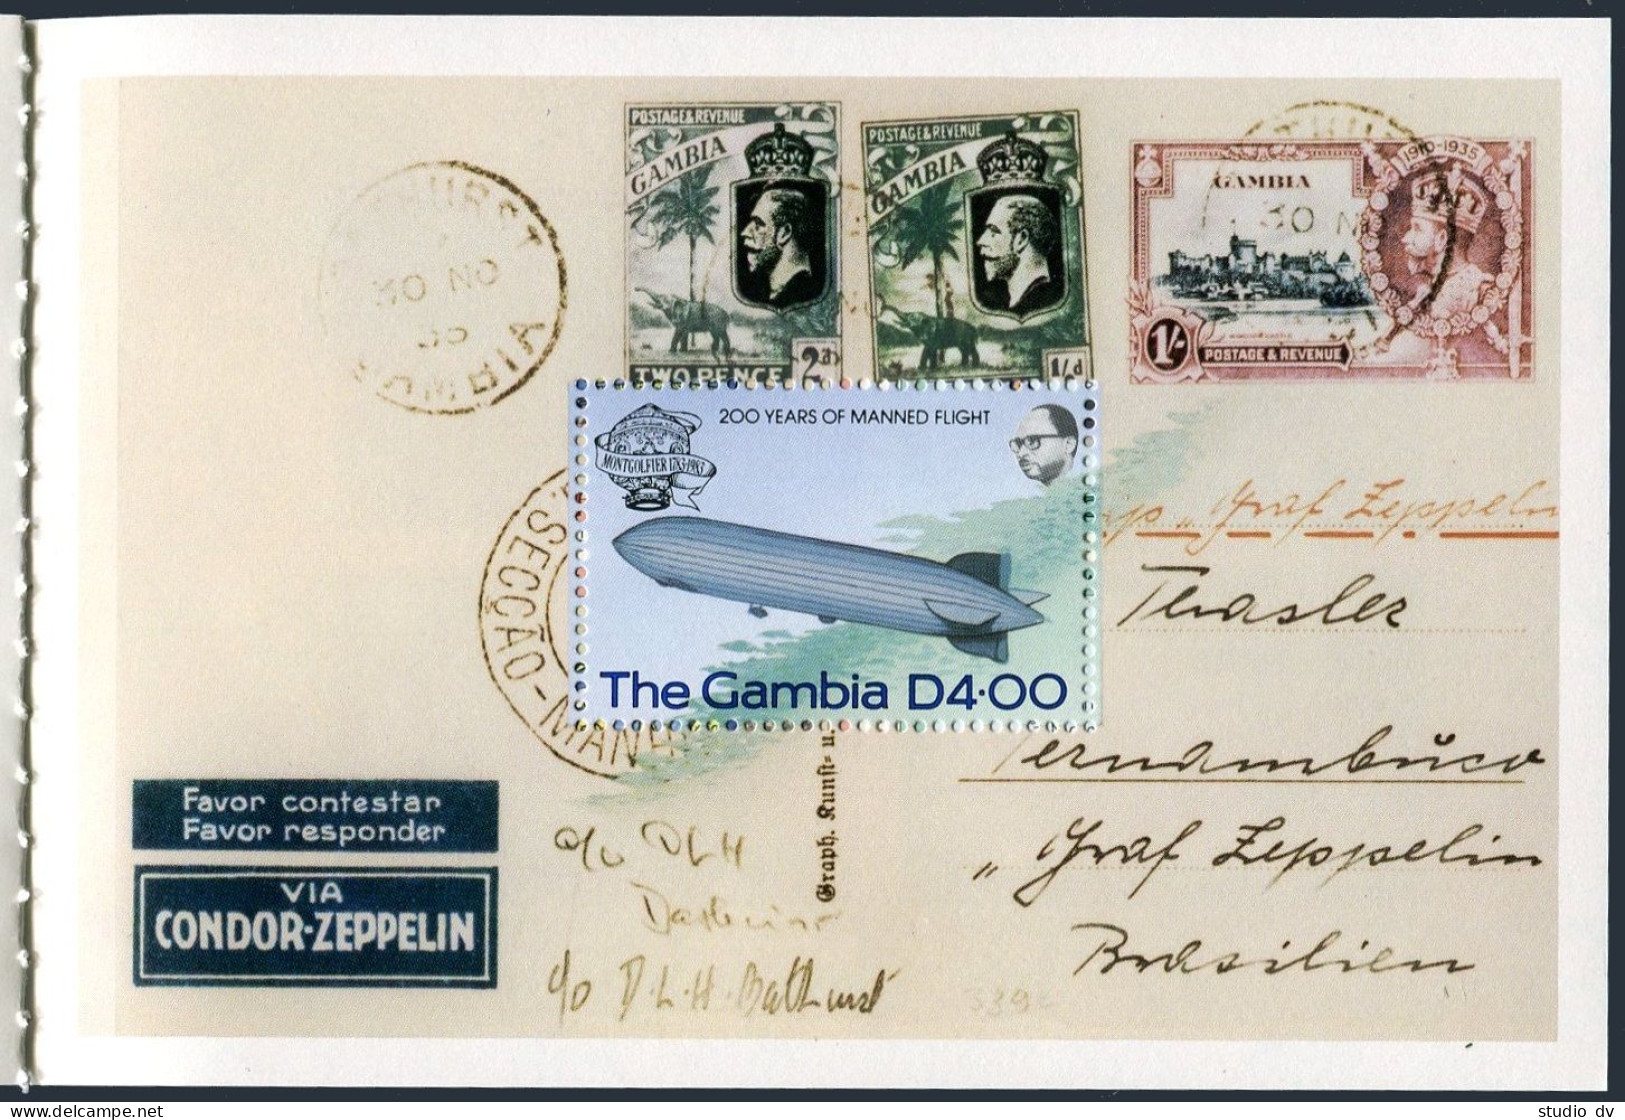 Gambia 493-497 Booklet, MNH. Manned Flight-200, 1983. Zeppelin,Balloon,Airplane. - Gambia (1965-...)